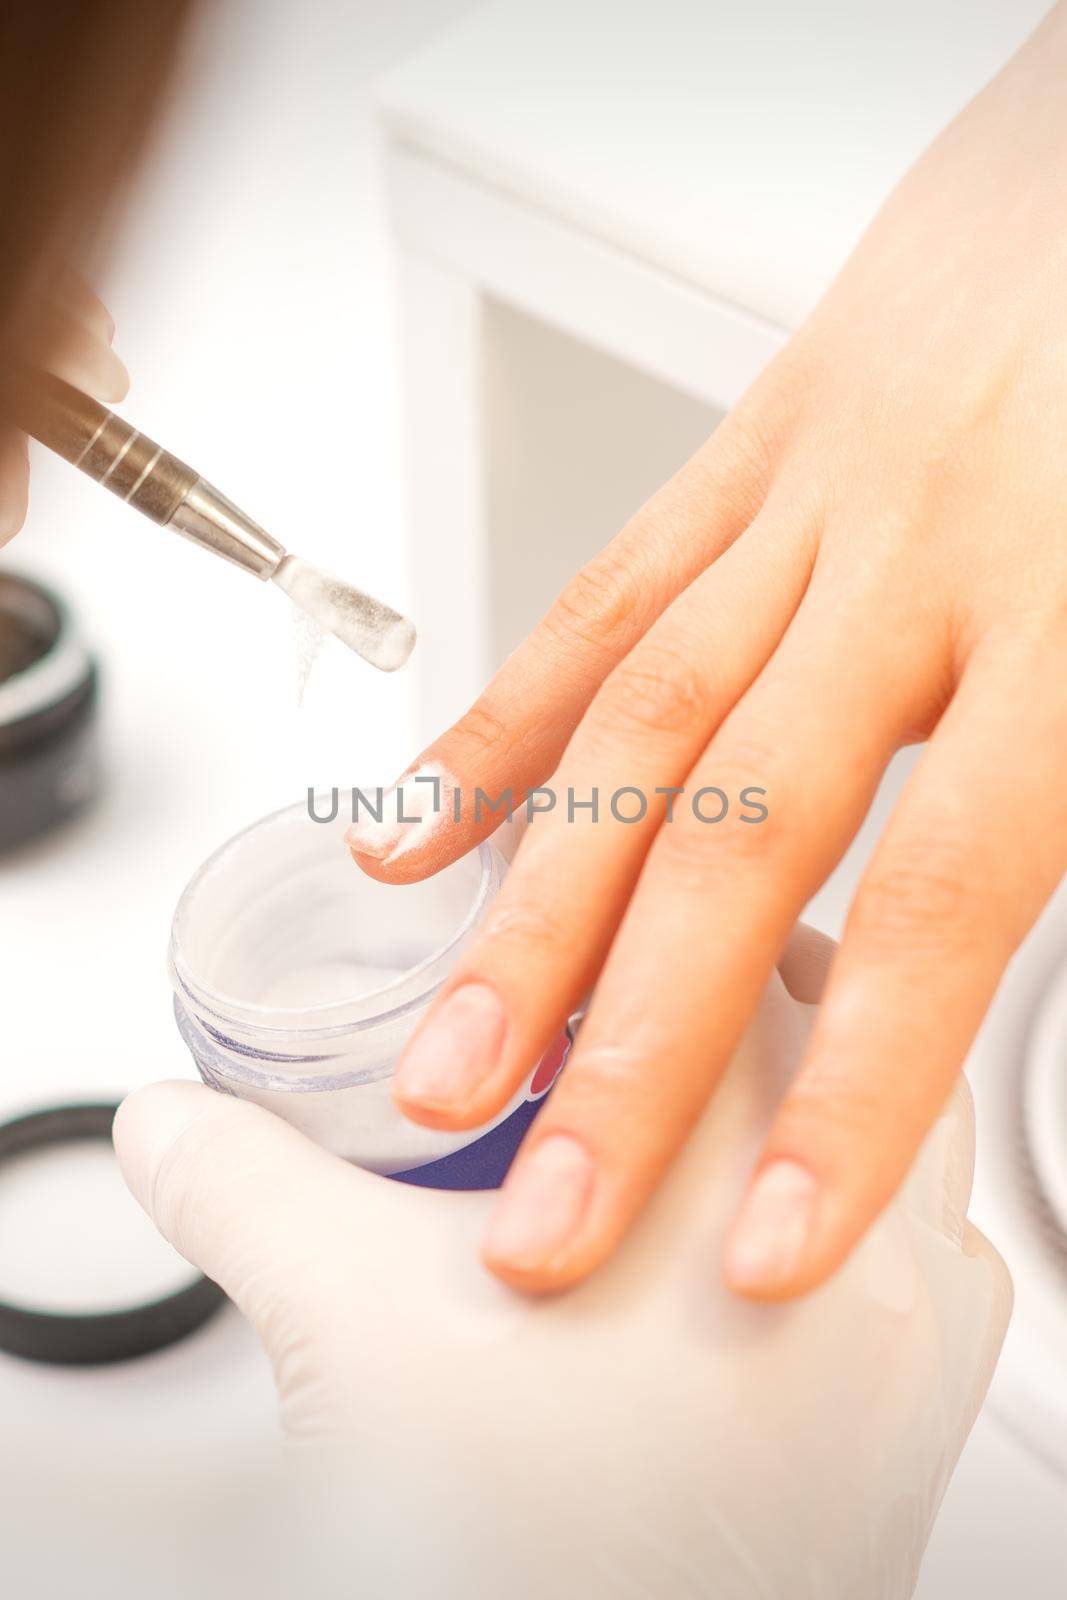 Manicure master applying acrylic powder on the female nails in a beauty salon. Strengthening of nails acrylic powder